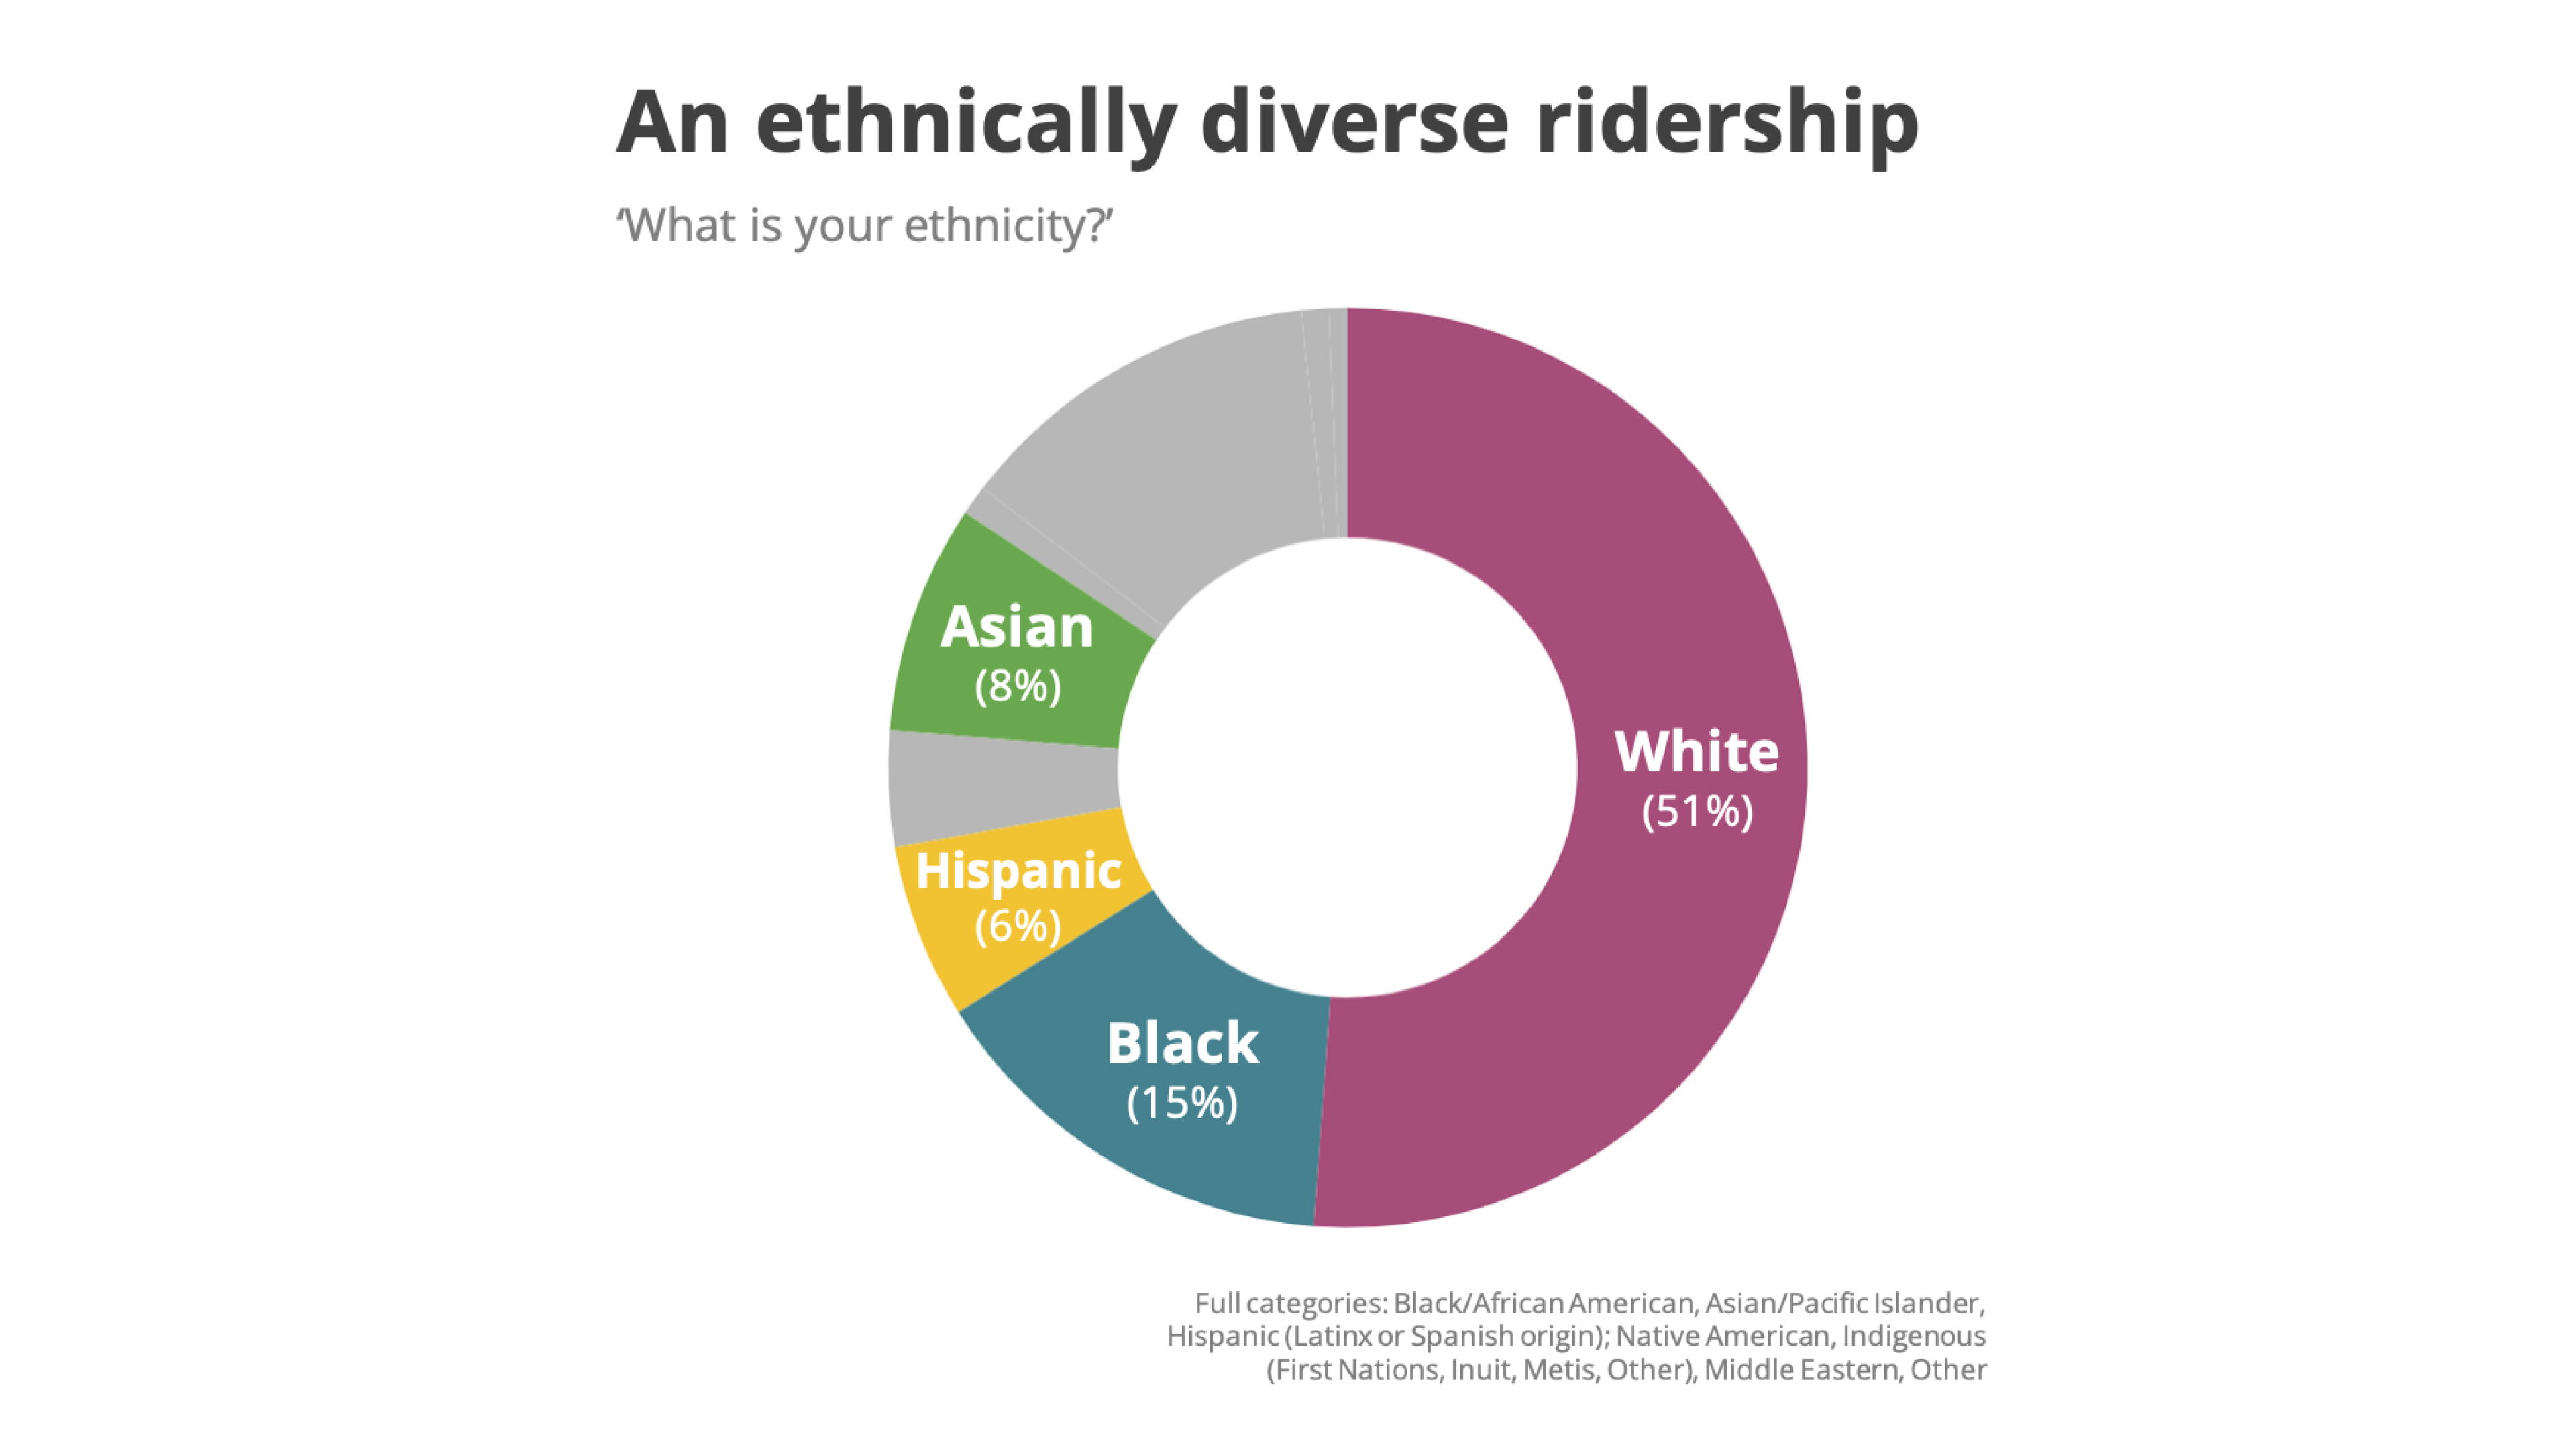 An ethnically diverse ridership